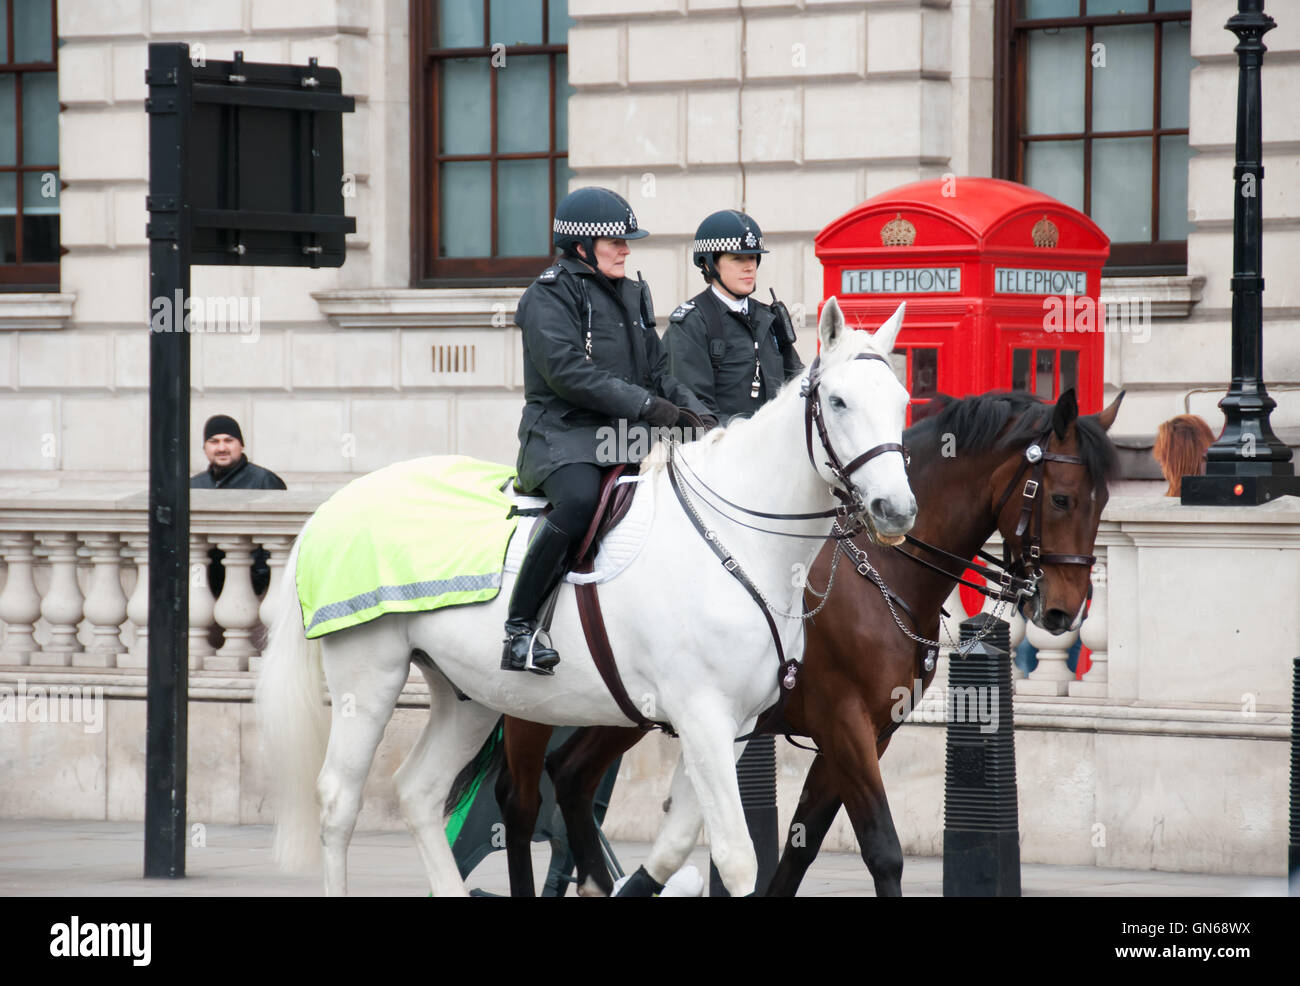 London, England. 06 march, 2016. Two symbols of London. Bobbies on horseback and the traditional red phone box. Stock Photo